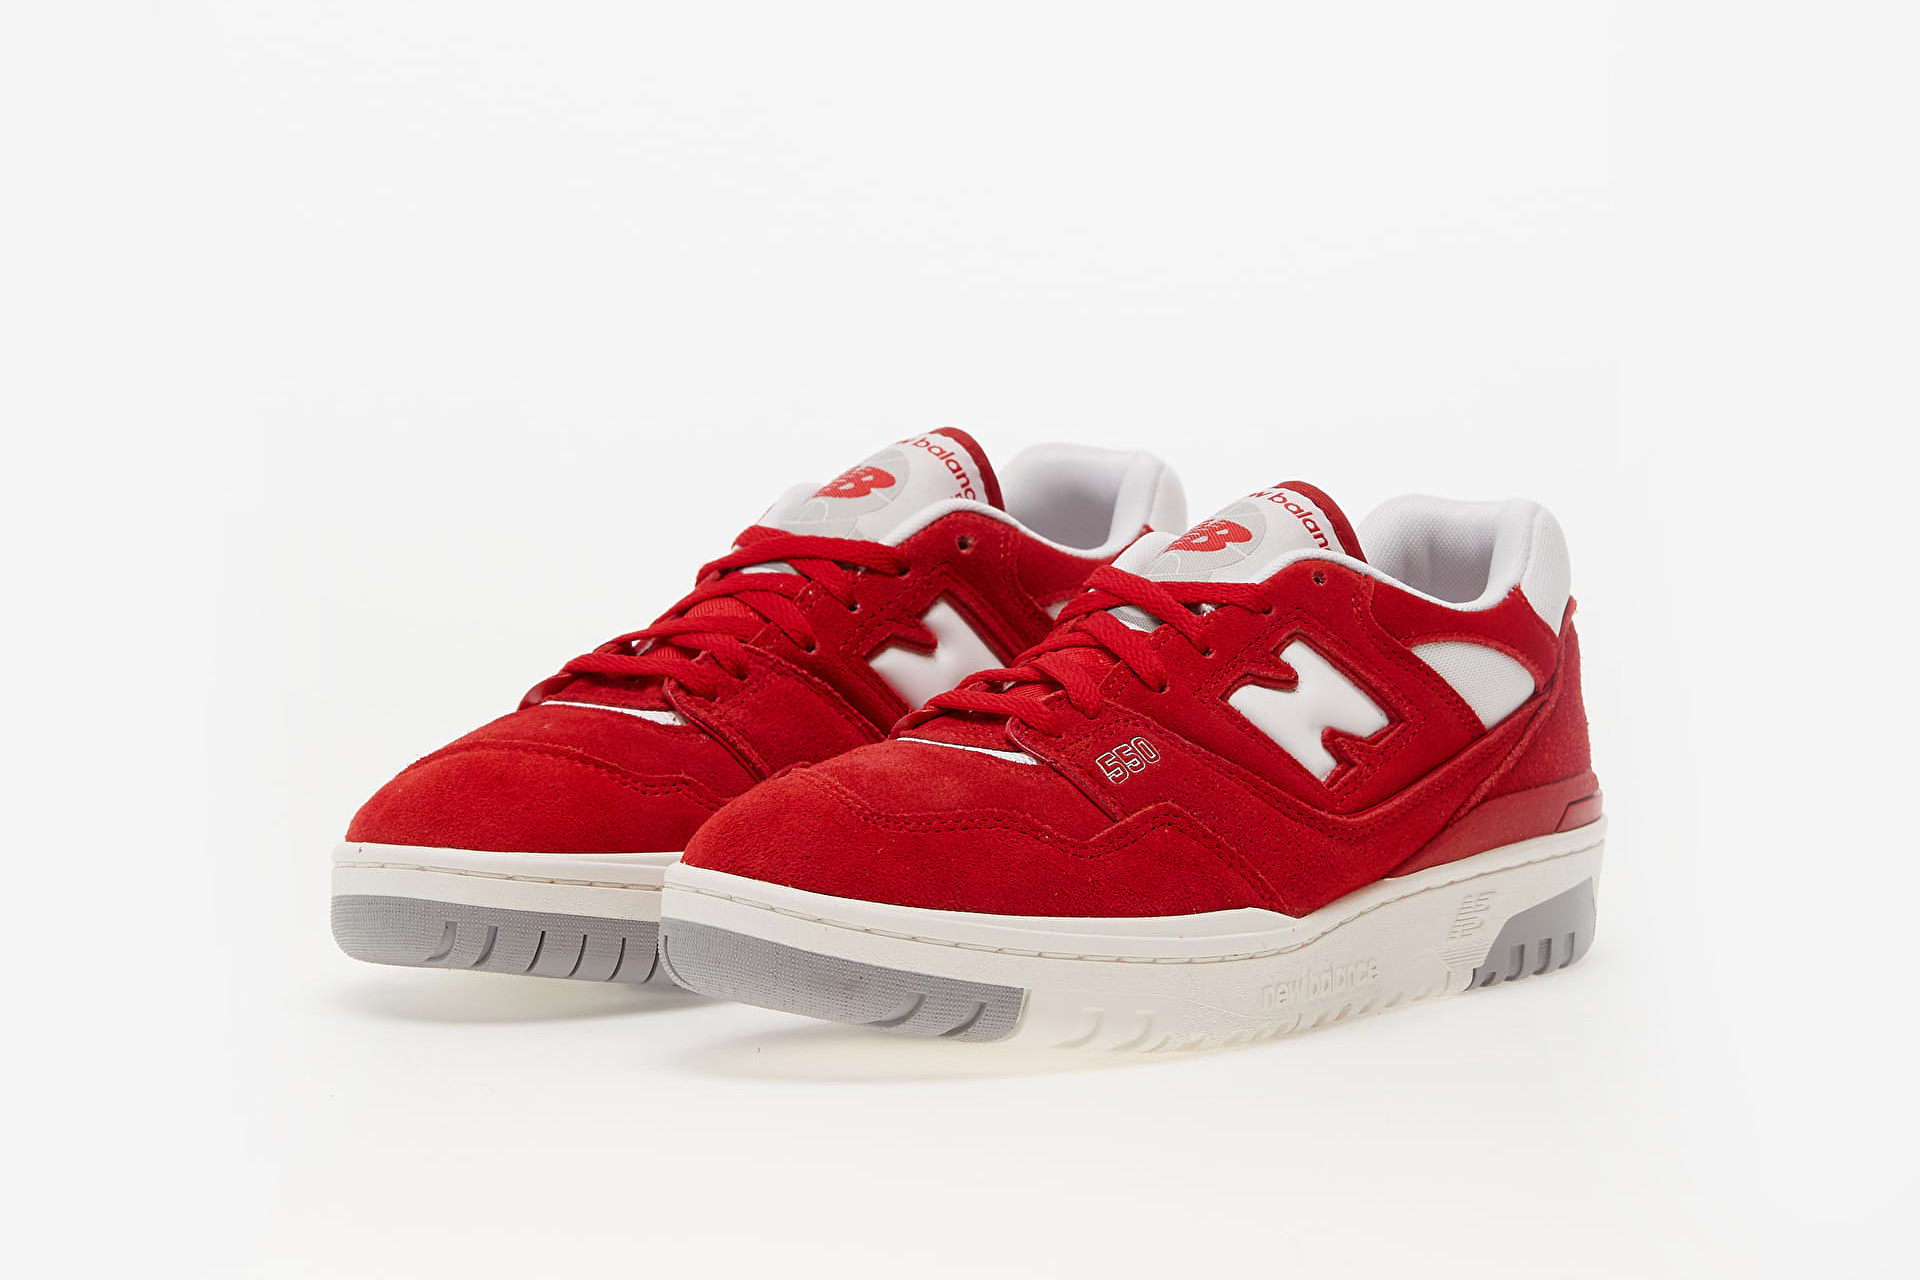 New Balance 550 - BB550VND - Team Red - Footshop - Releases